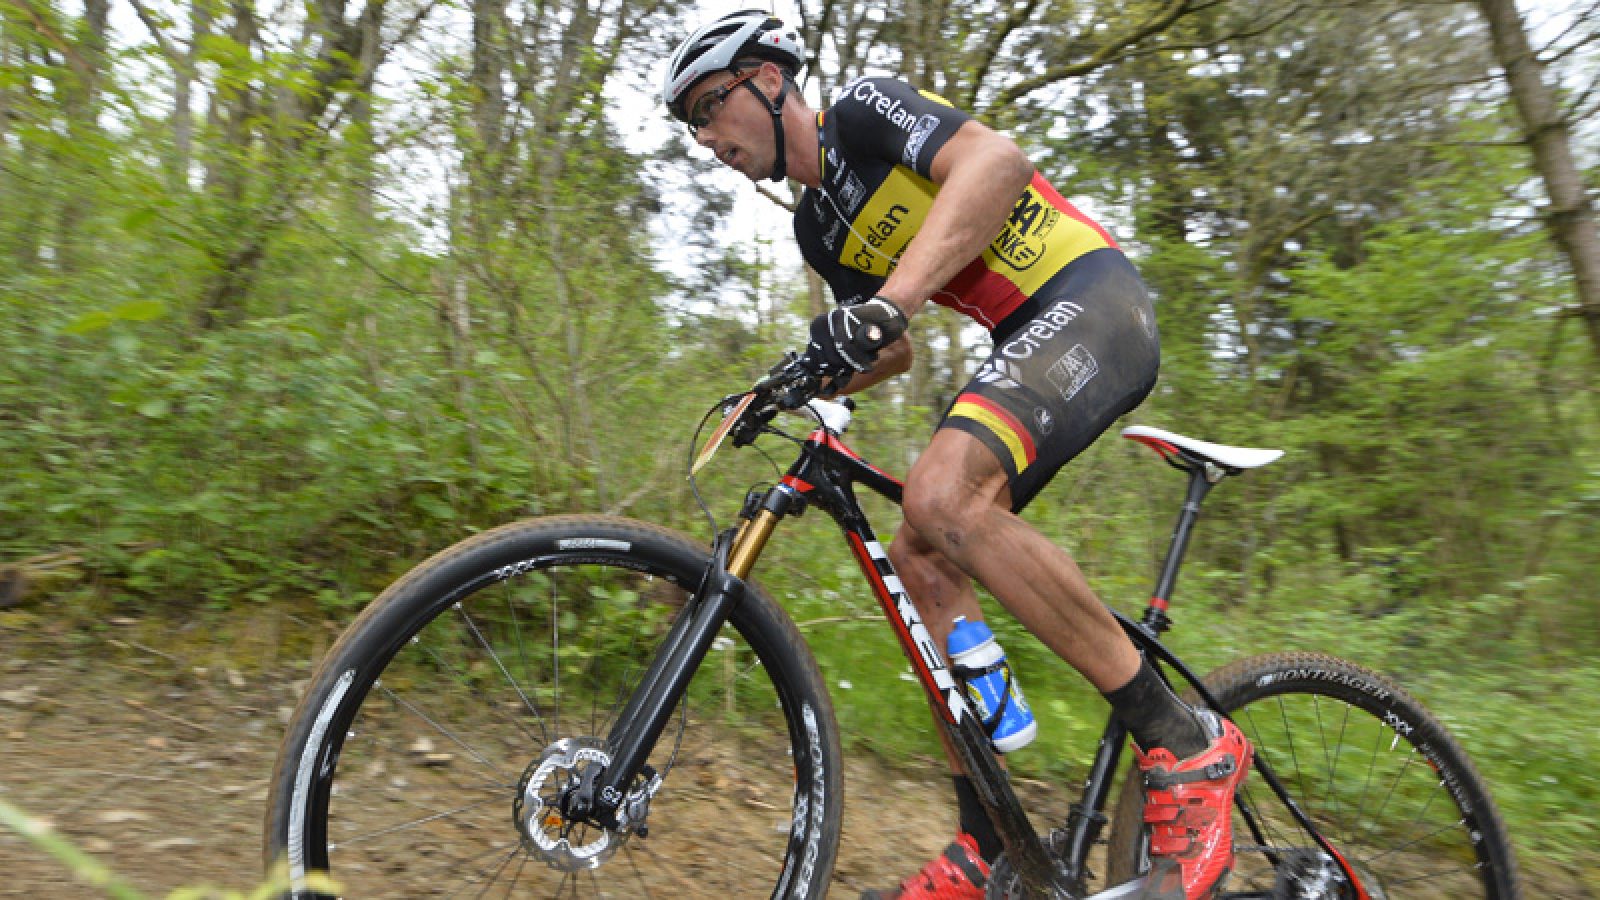 BELGIUM MOUNTAINBIKE ROC D' ANDENNE CROSS COUNTRY